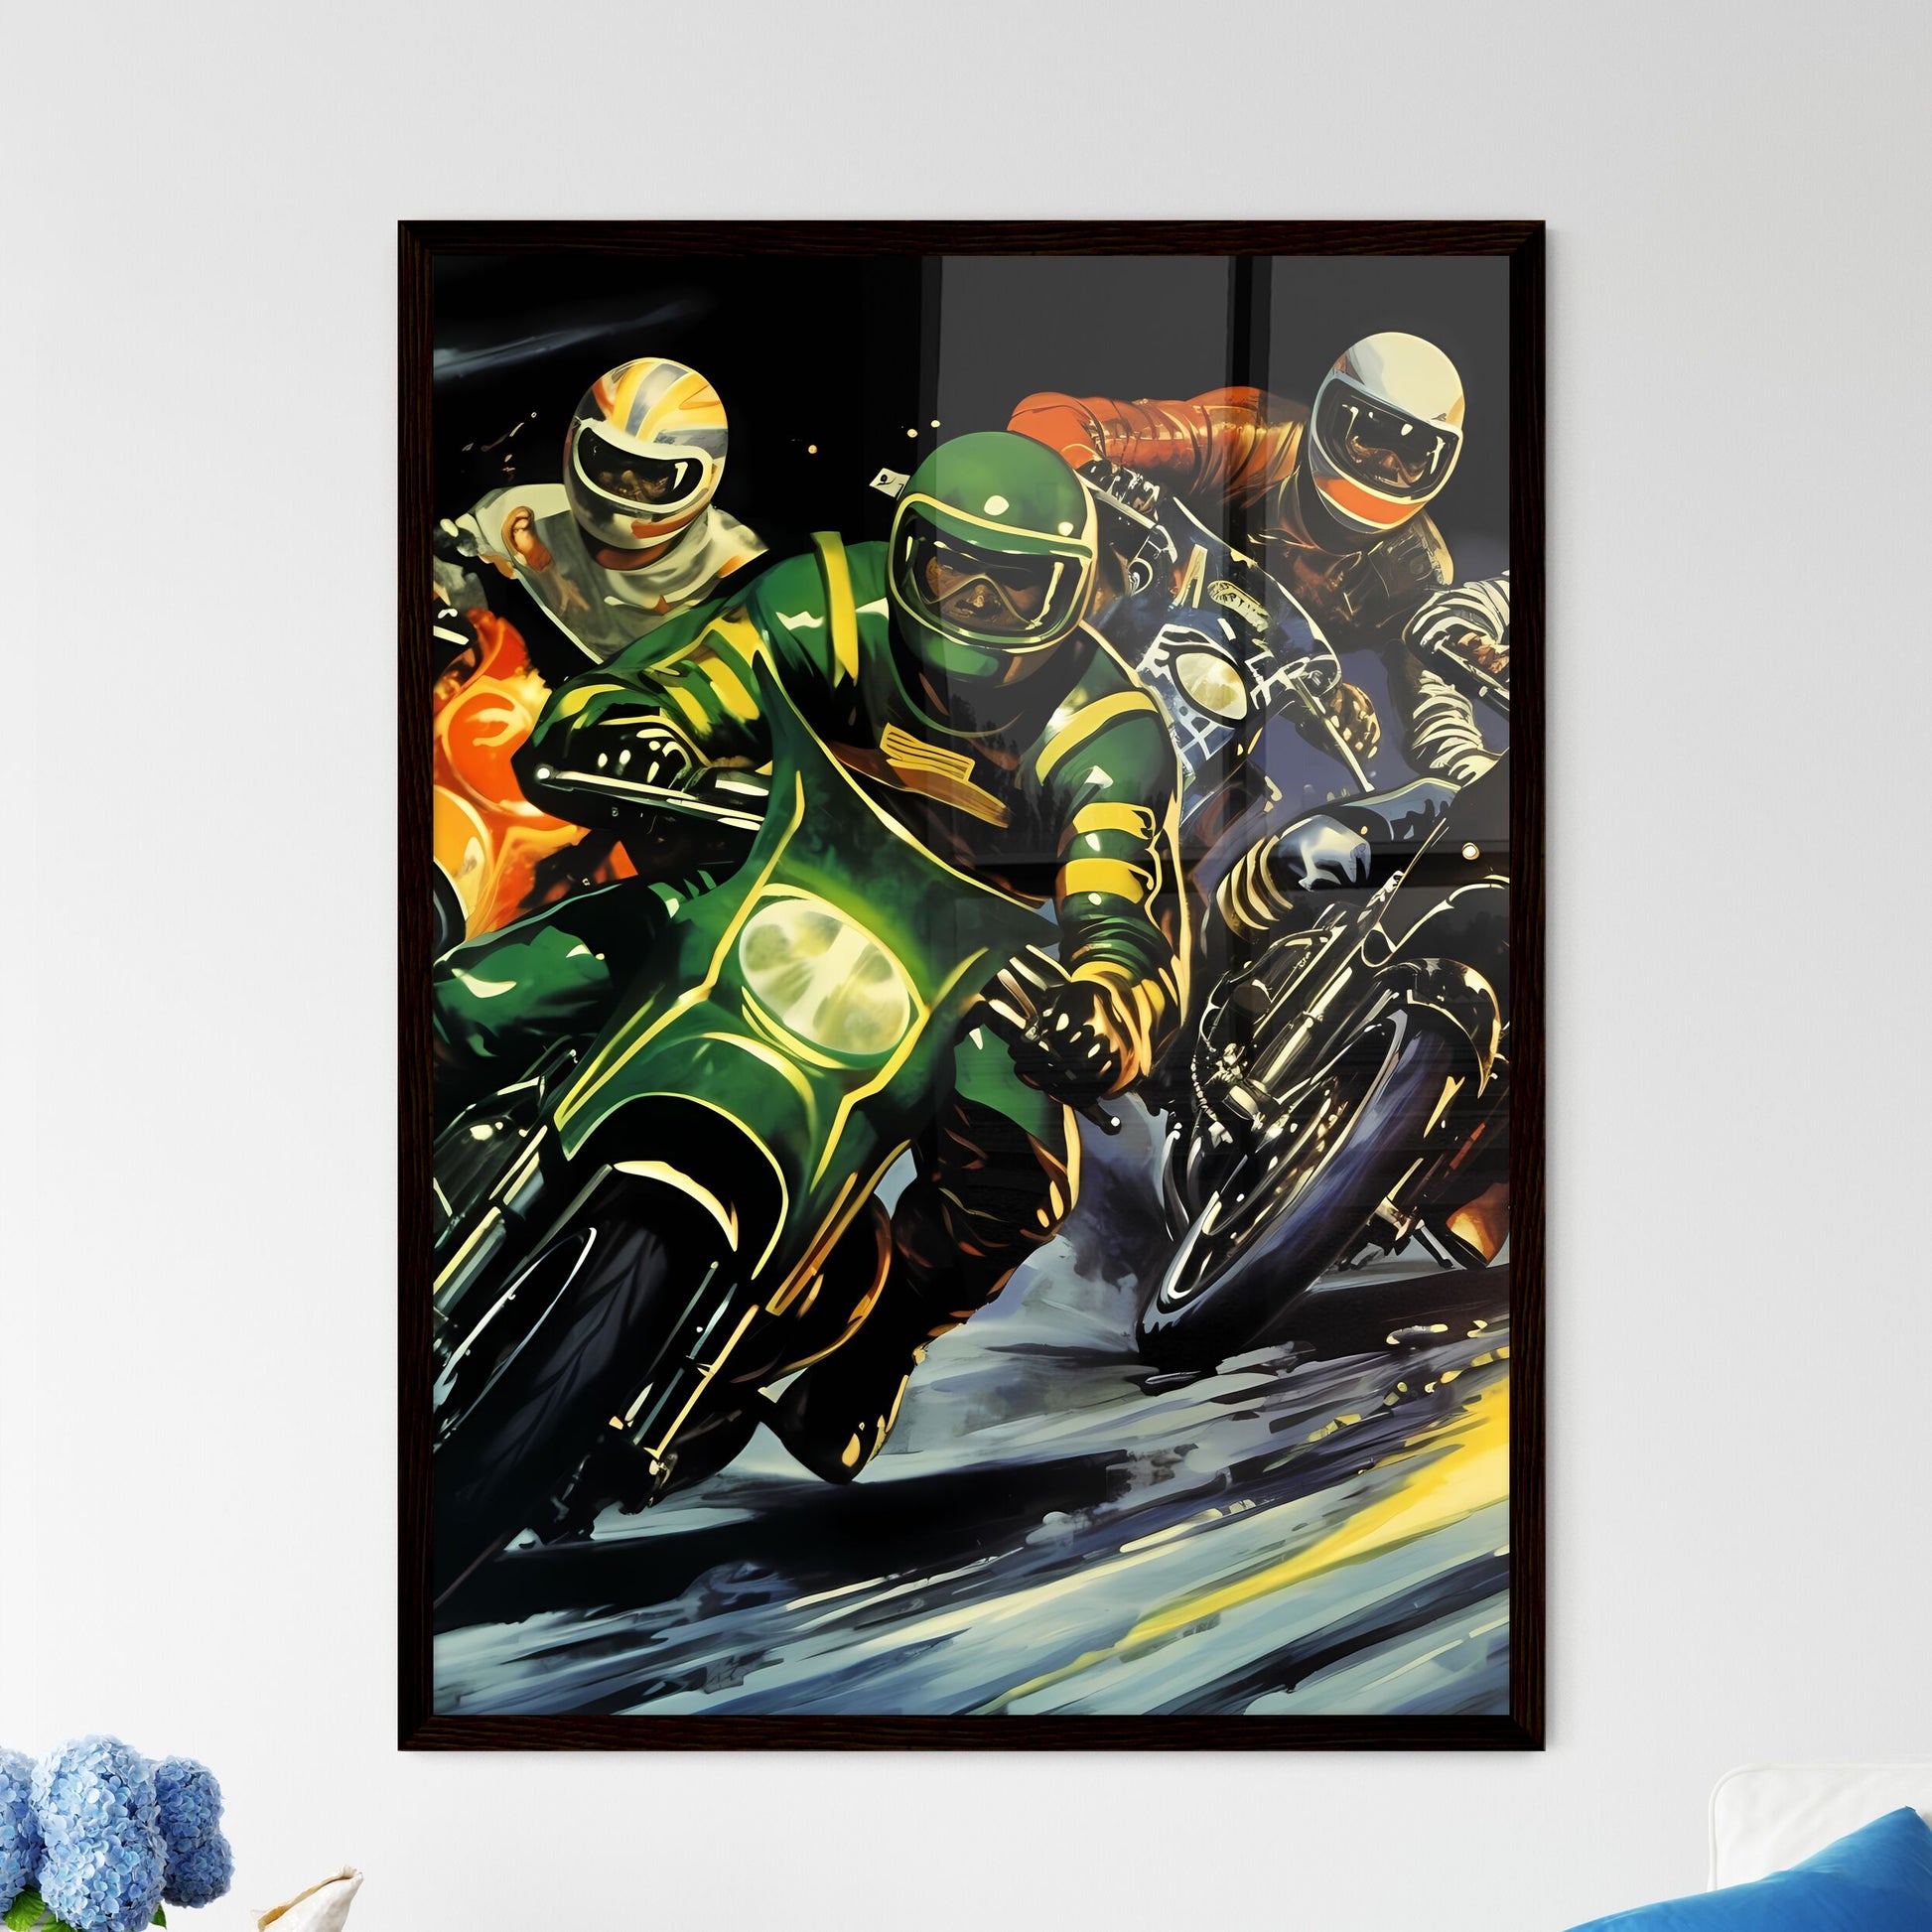 A Poster of Vintage Motorcycle Racing Poster - A Group Of People On  Motorcycles by HEBSTREIT